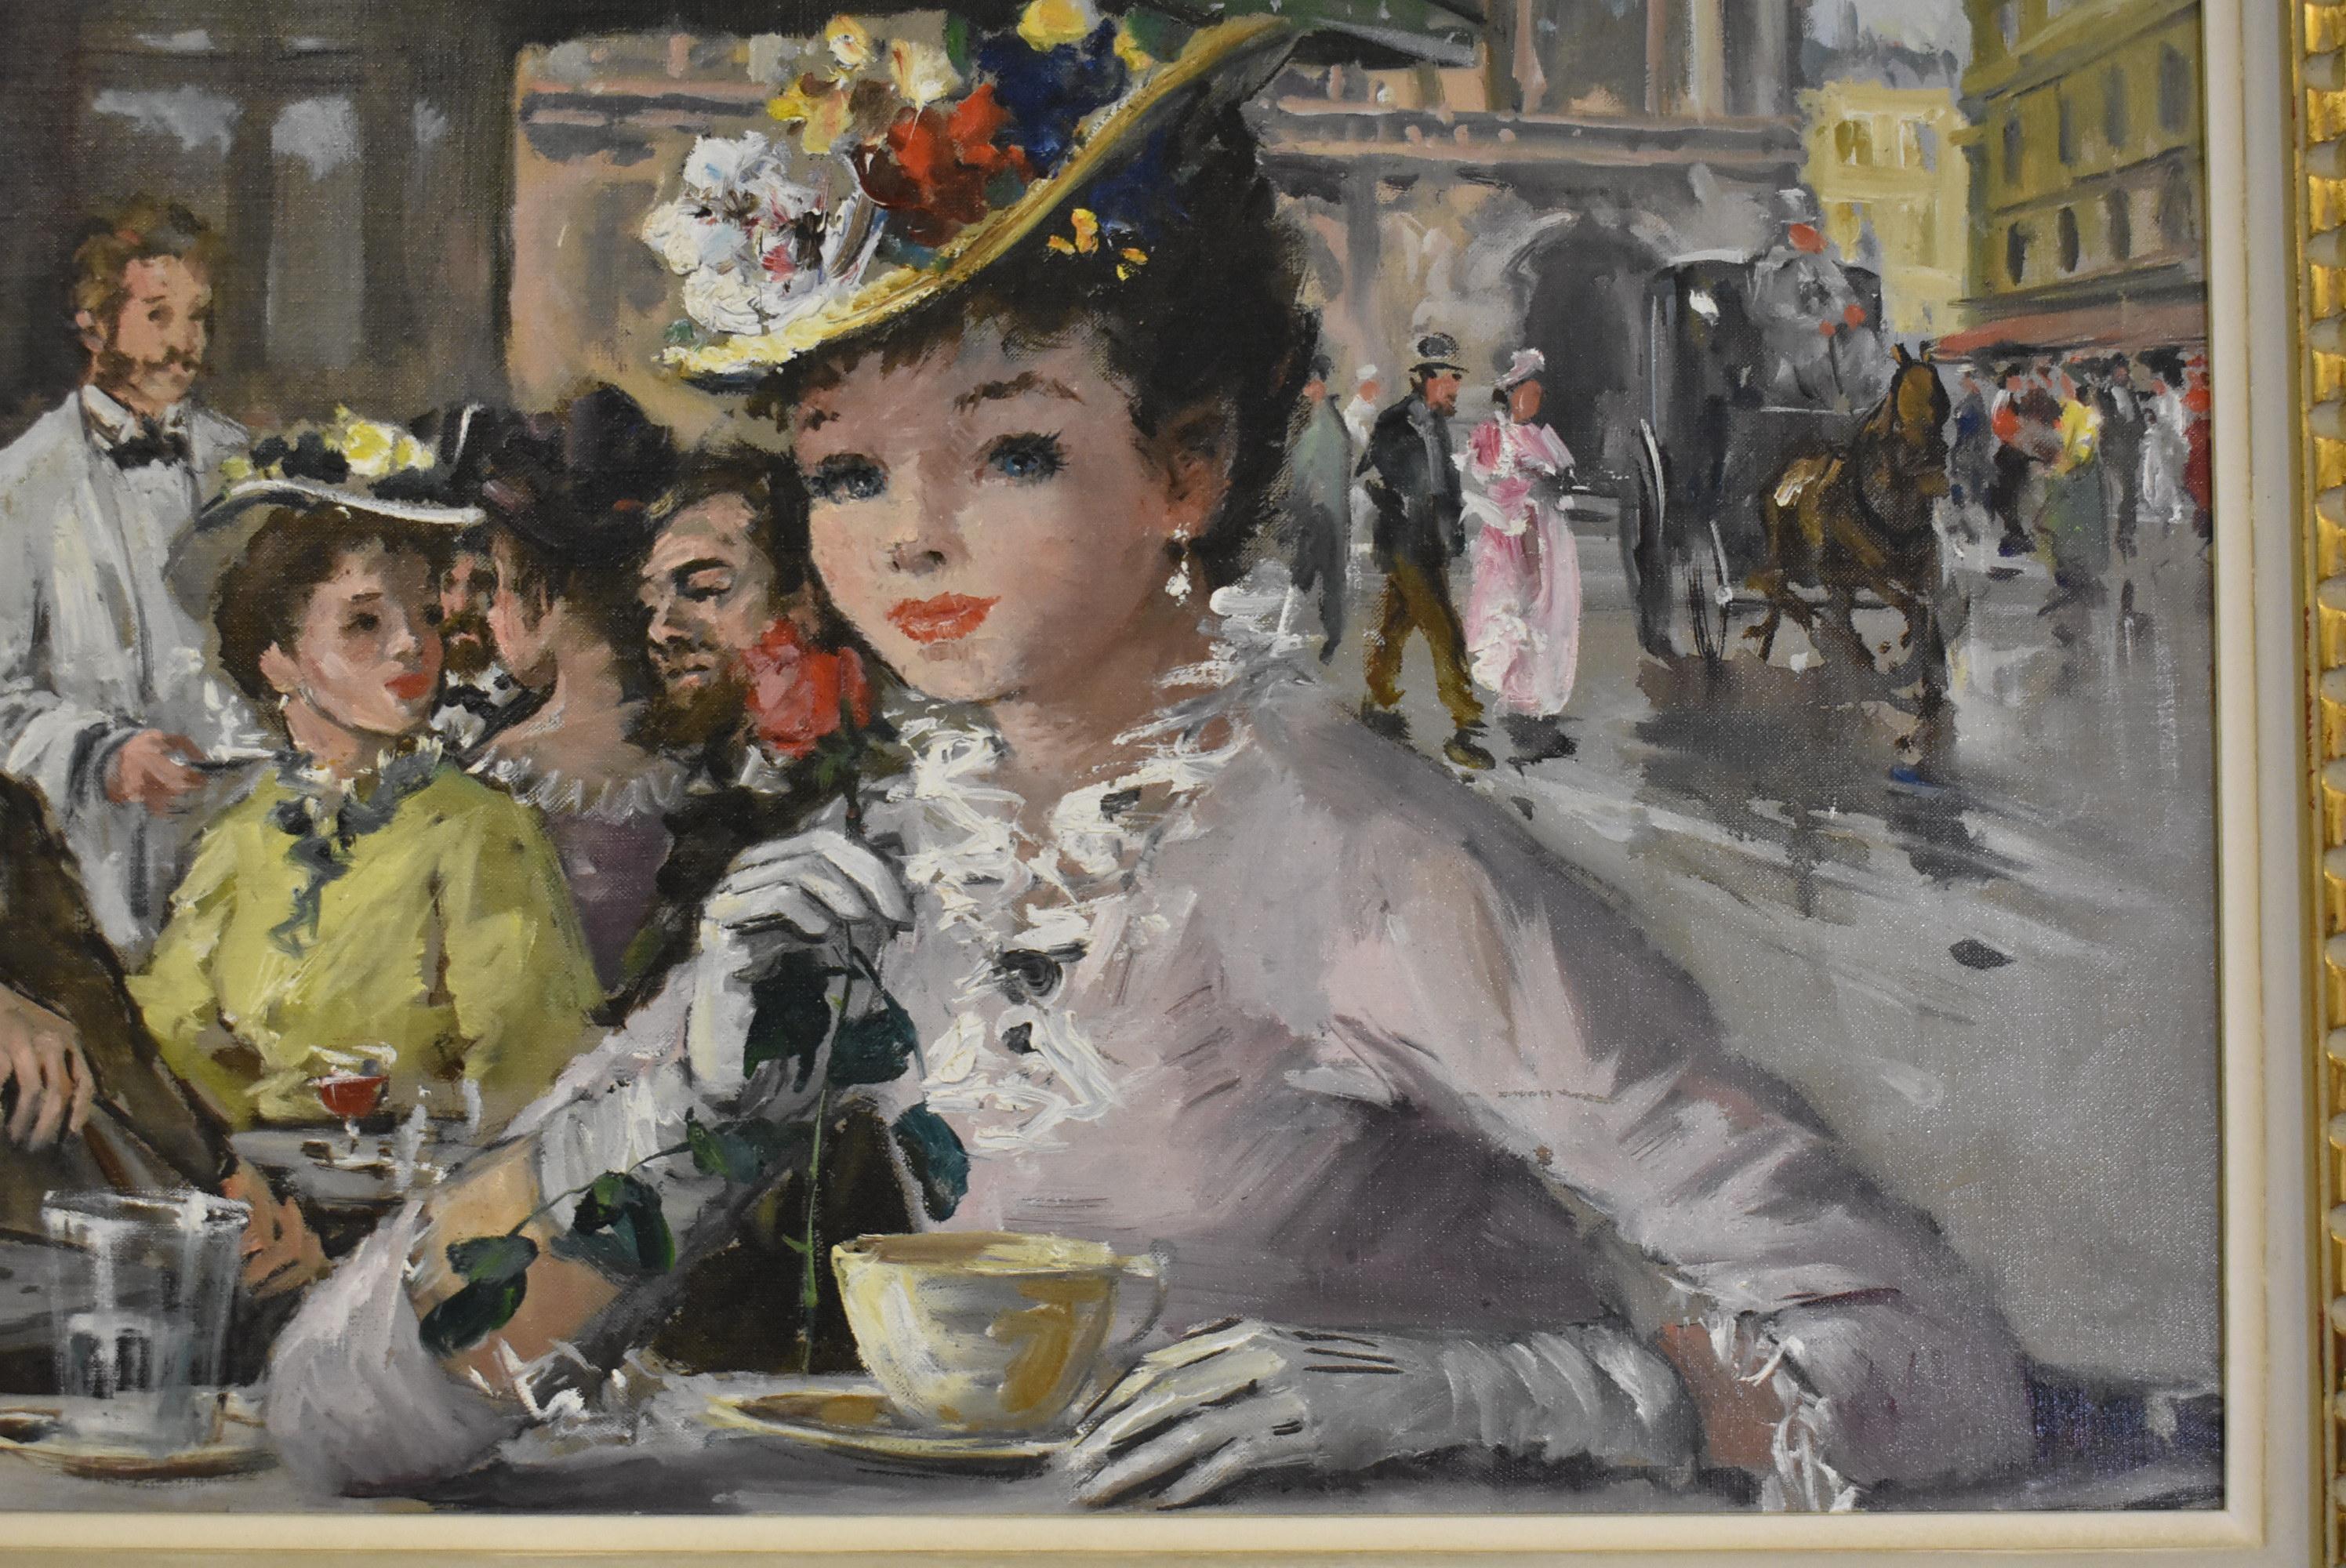 Oil painting on board of French street scene / cafe. Elegant lady with a floral hat drinking coffee. Many patrons enjoying outdoor dining while watching a bustling street with horse drawn carriage. Framed in carved wood frame.